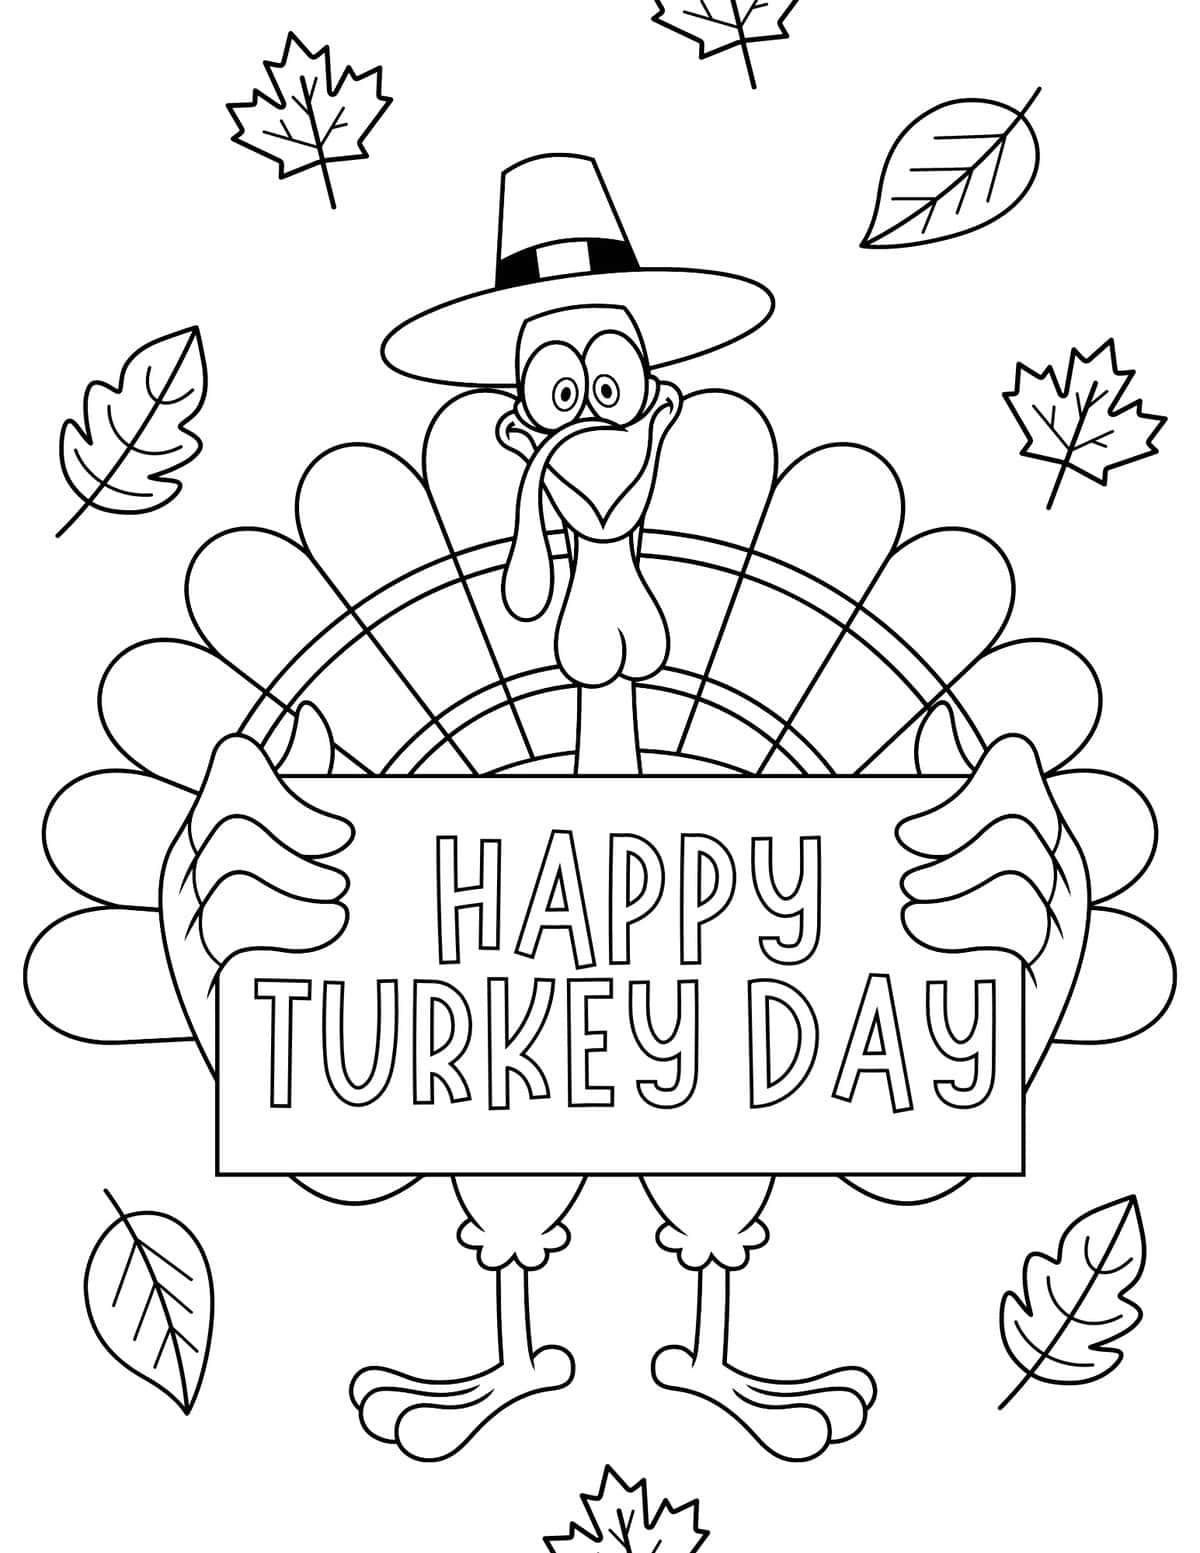 happy turkey day sign thanksgiving coloring page